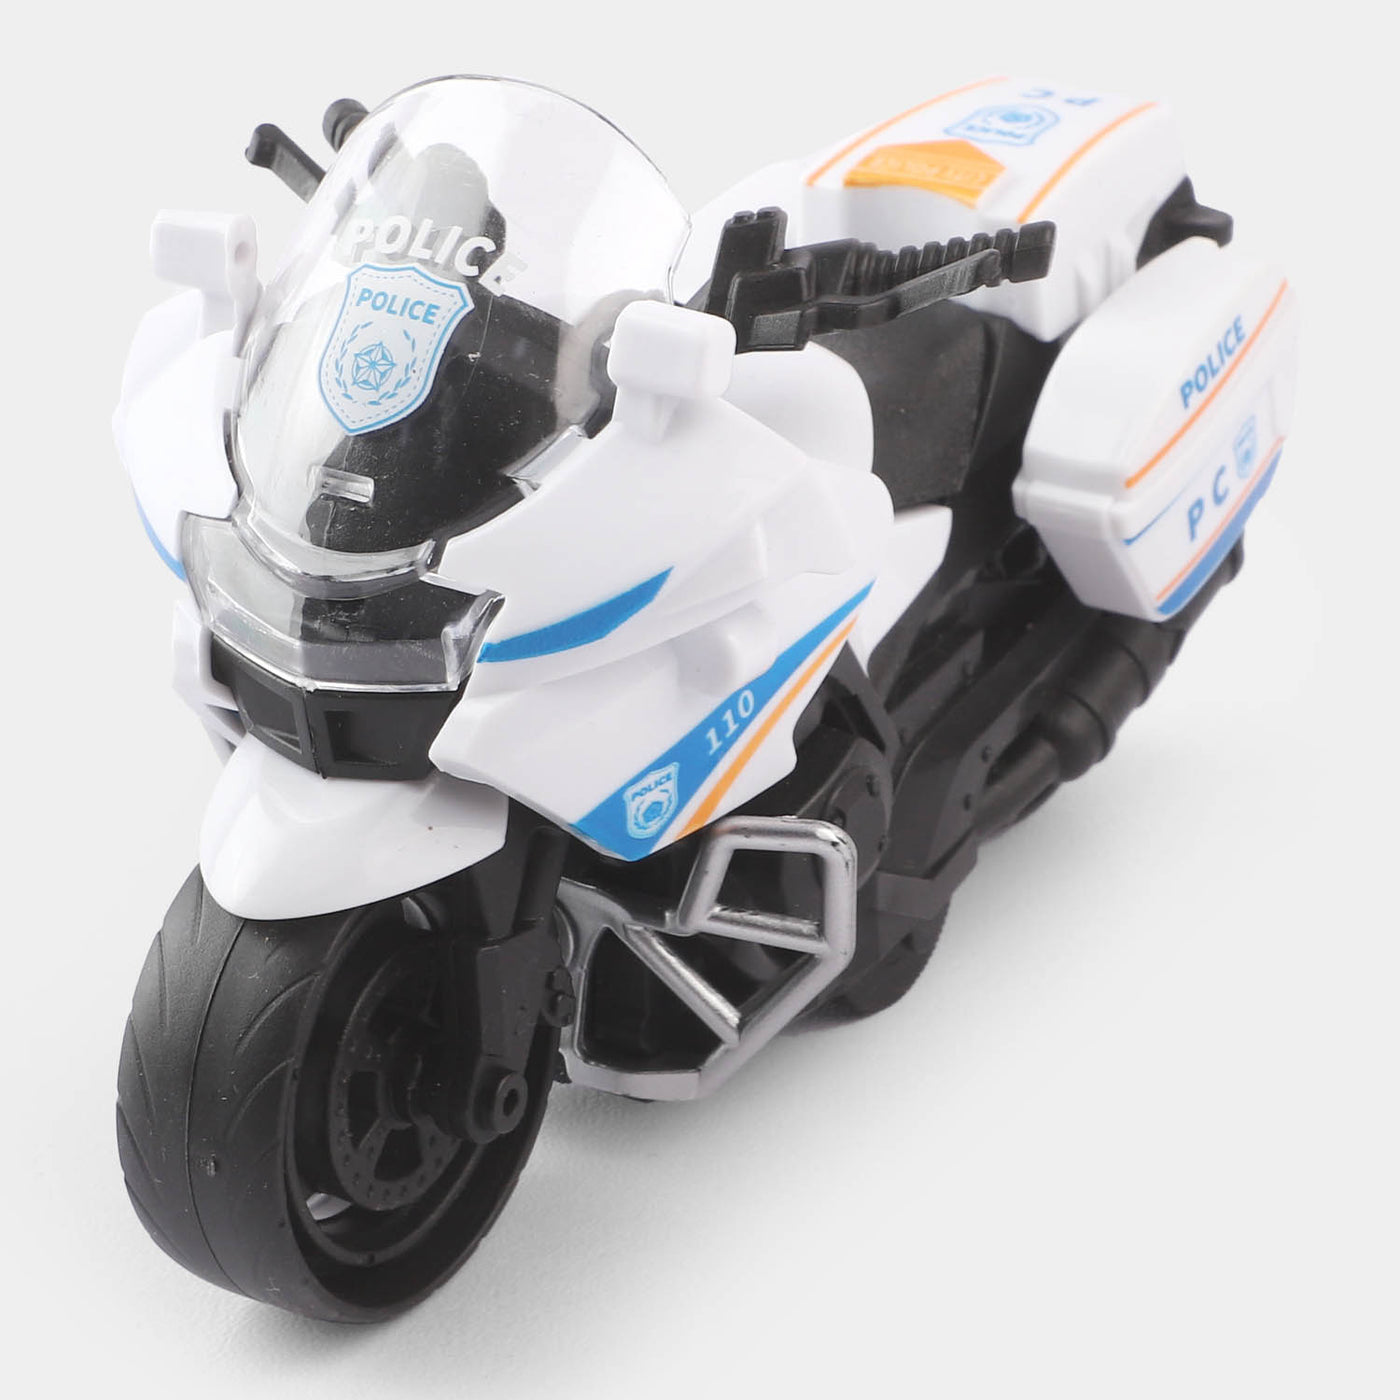 Friction Motorbike Toy For Kids